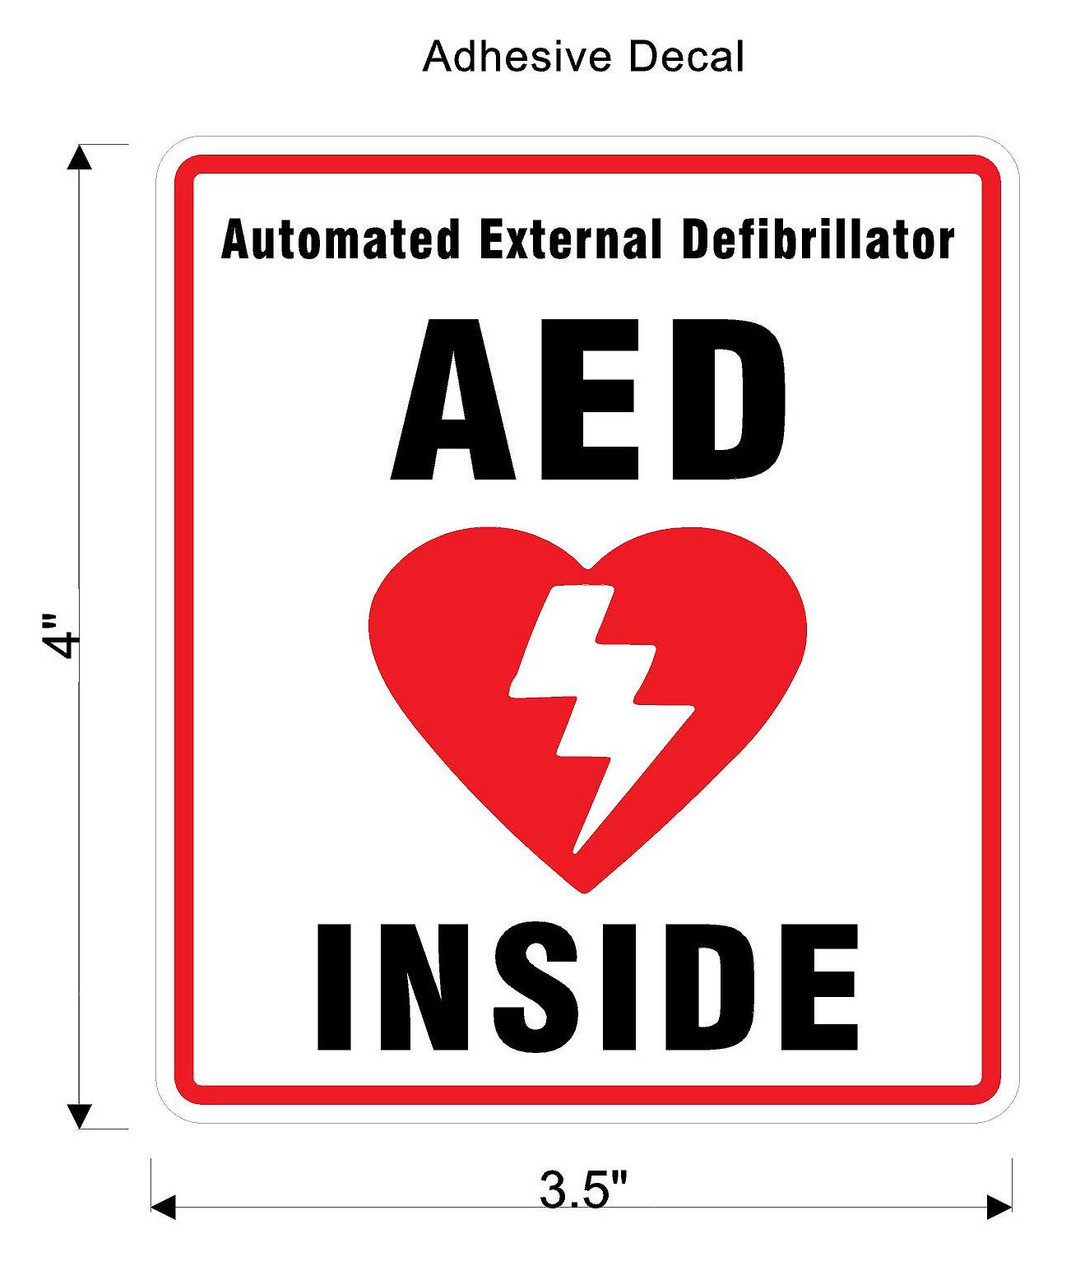 AED INSIDE_Automated External Defibrillator_decal